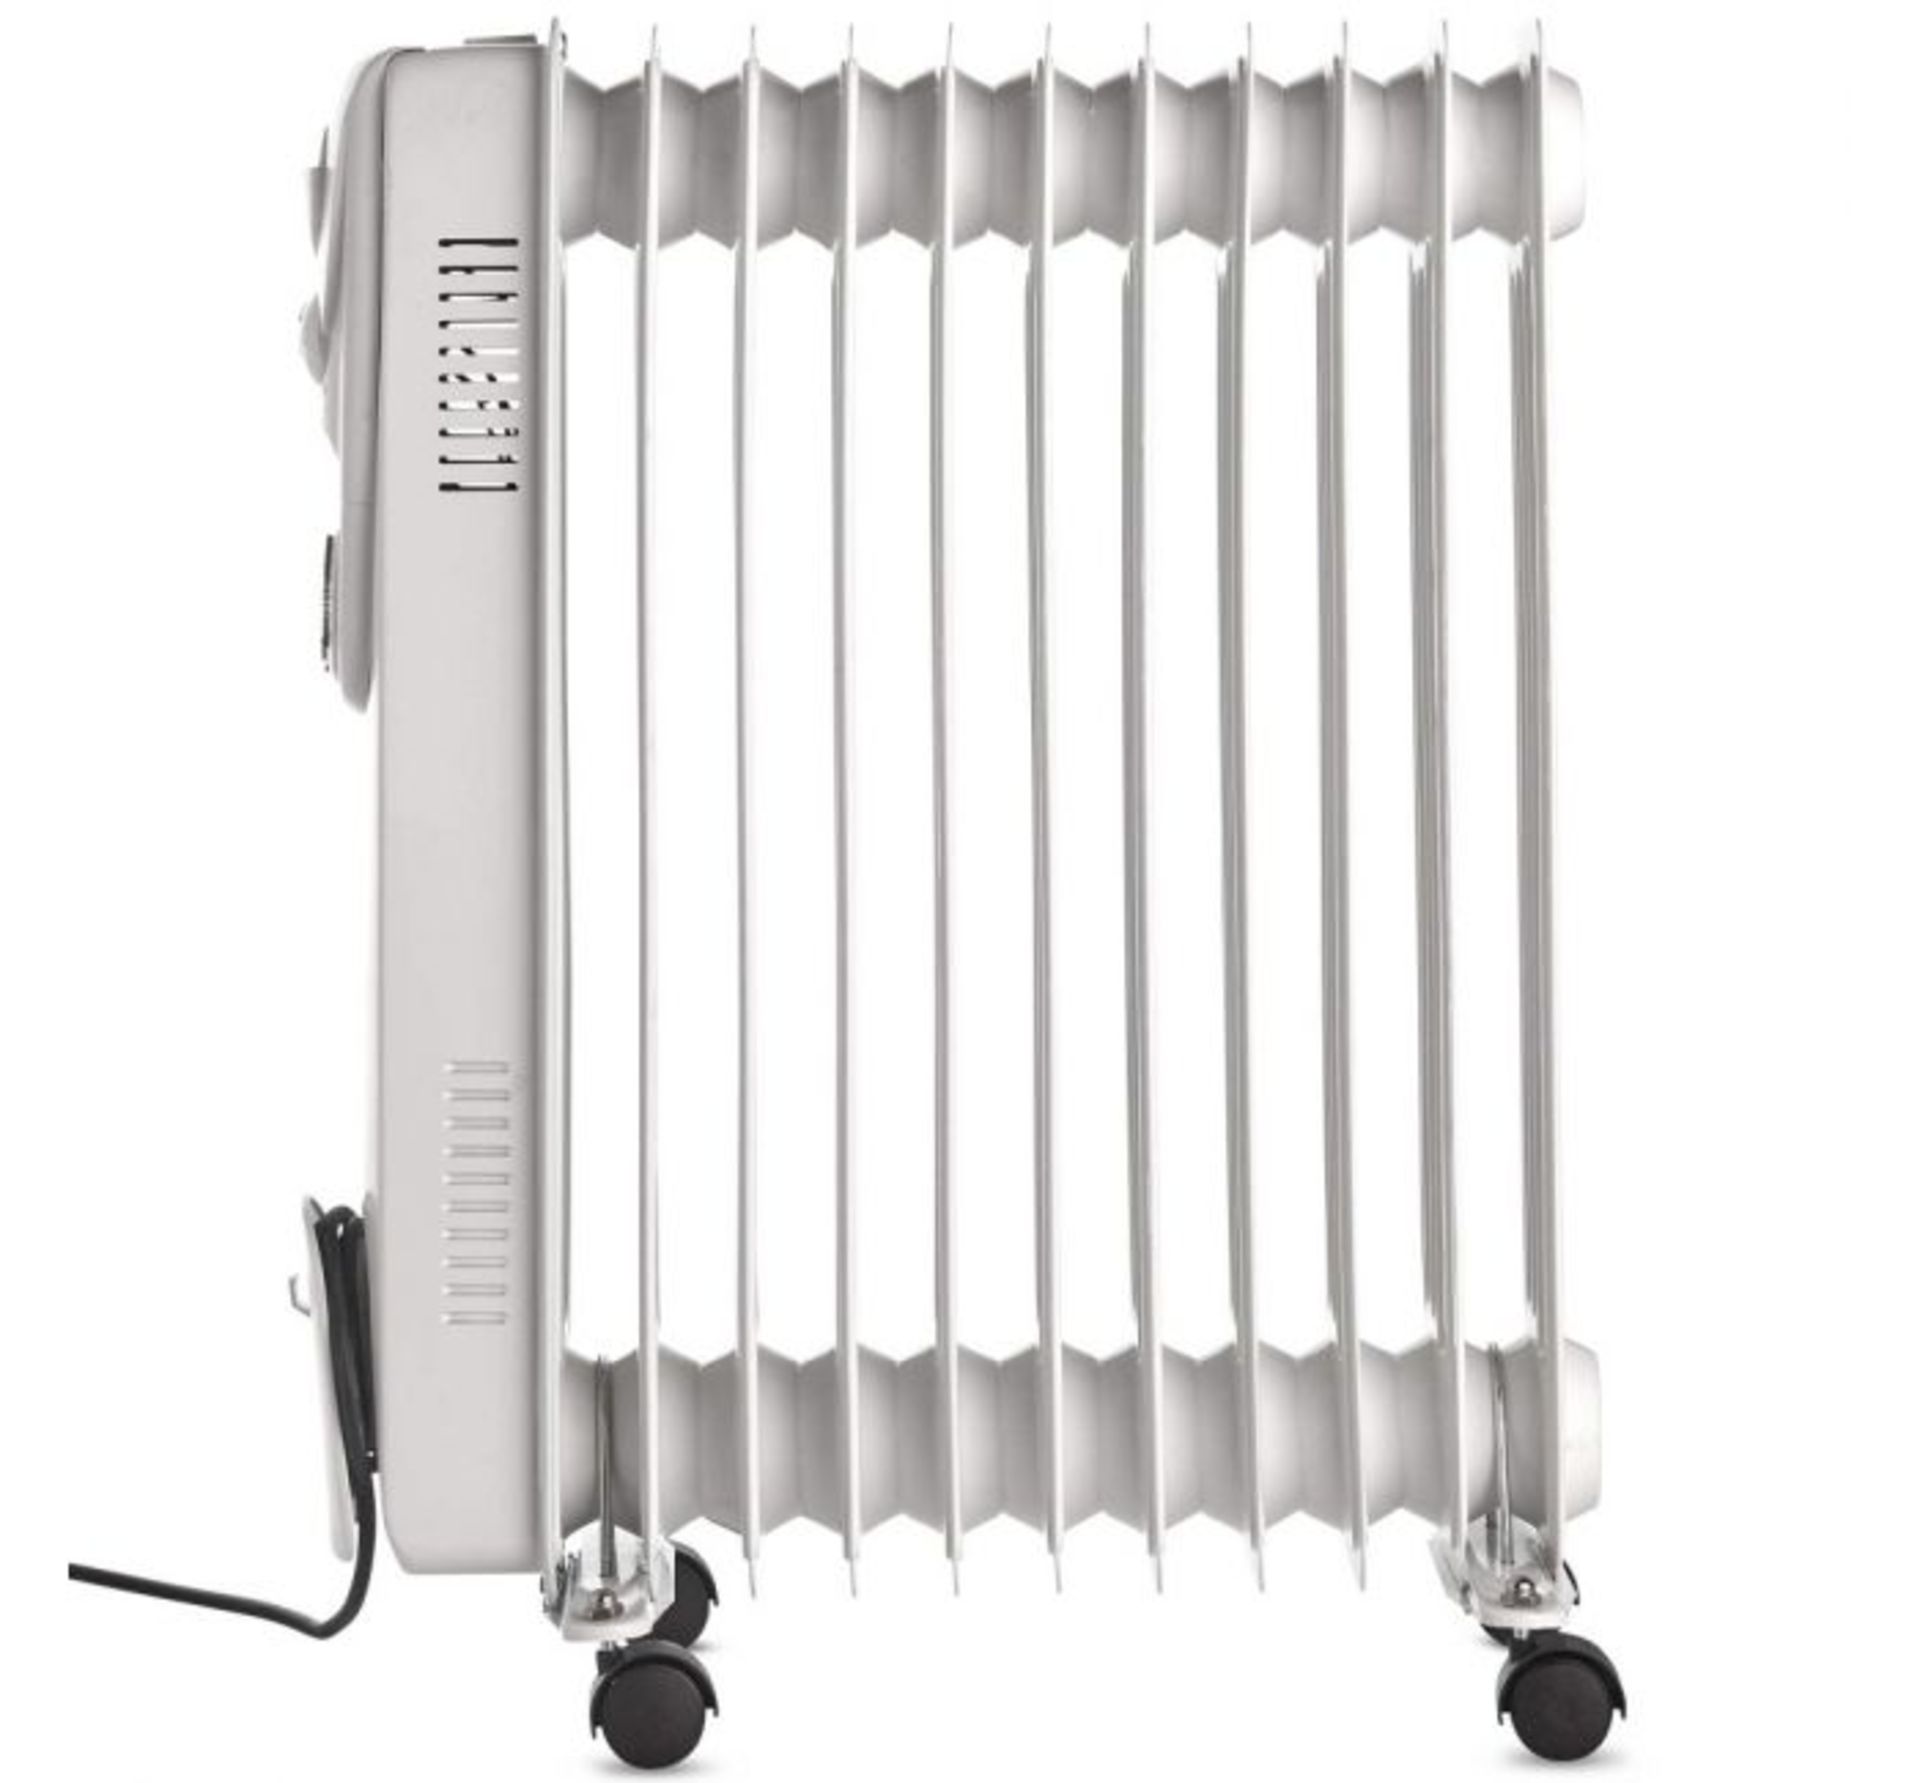 (UR82) 11 Fin 2500W Oil Filled Radiator - White Suitable for areas up to 28 square metres 3 p... - Image 4 of 4